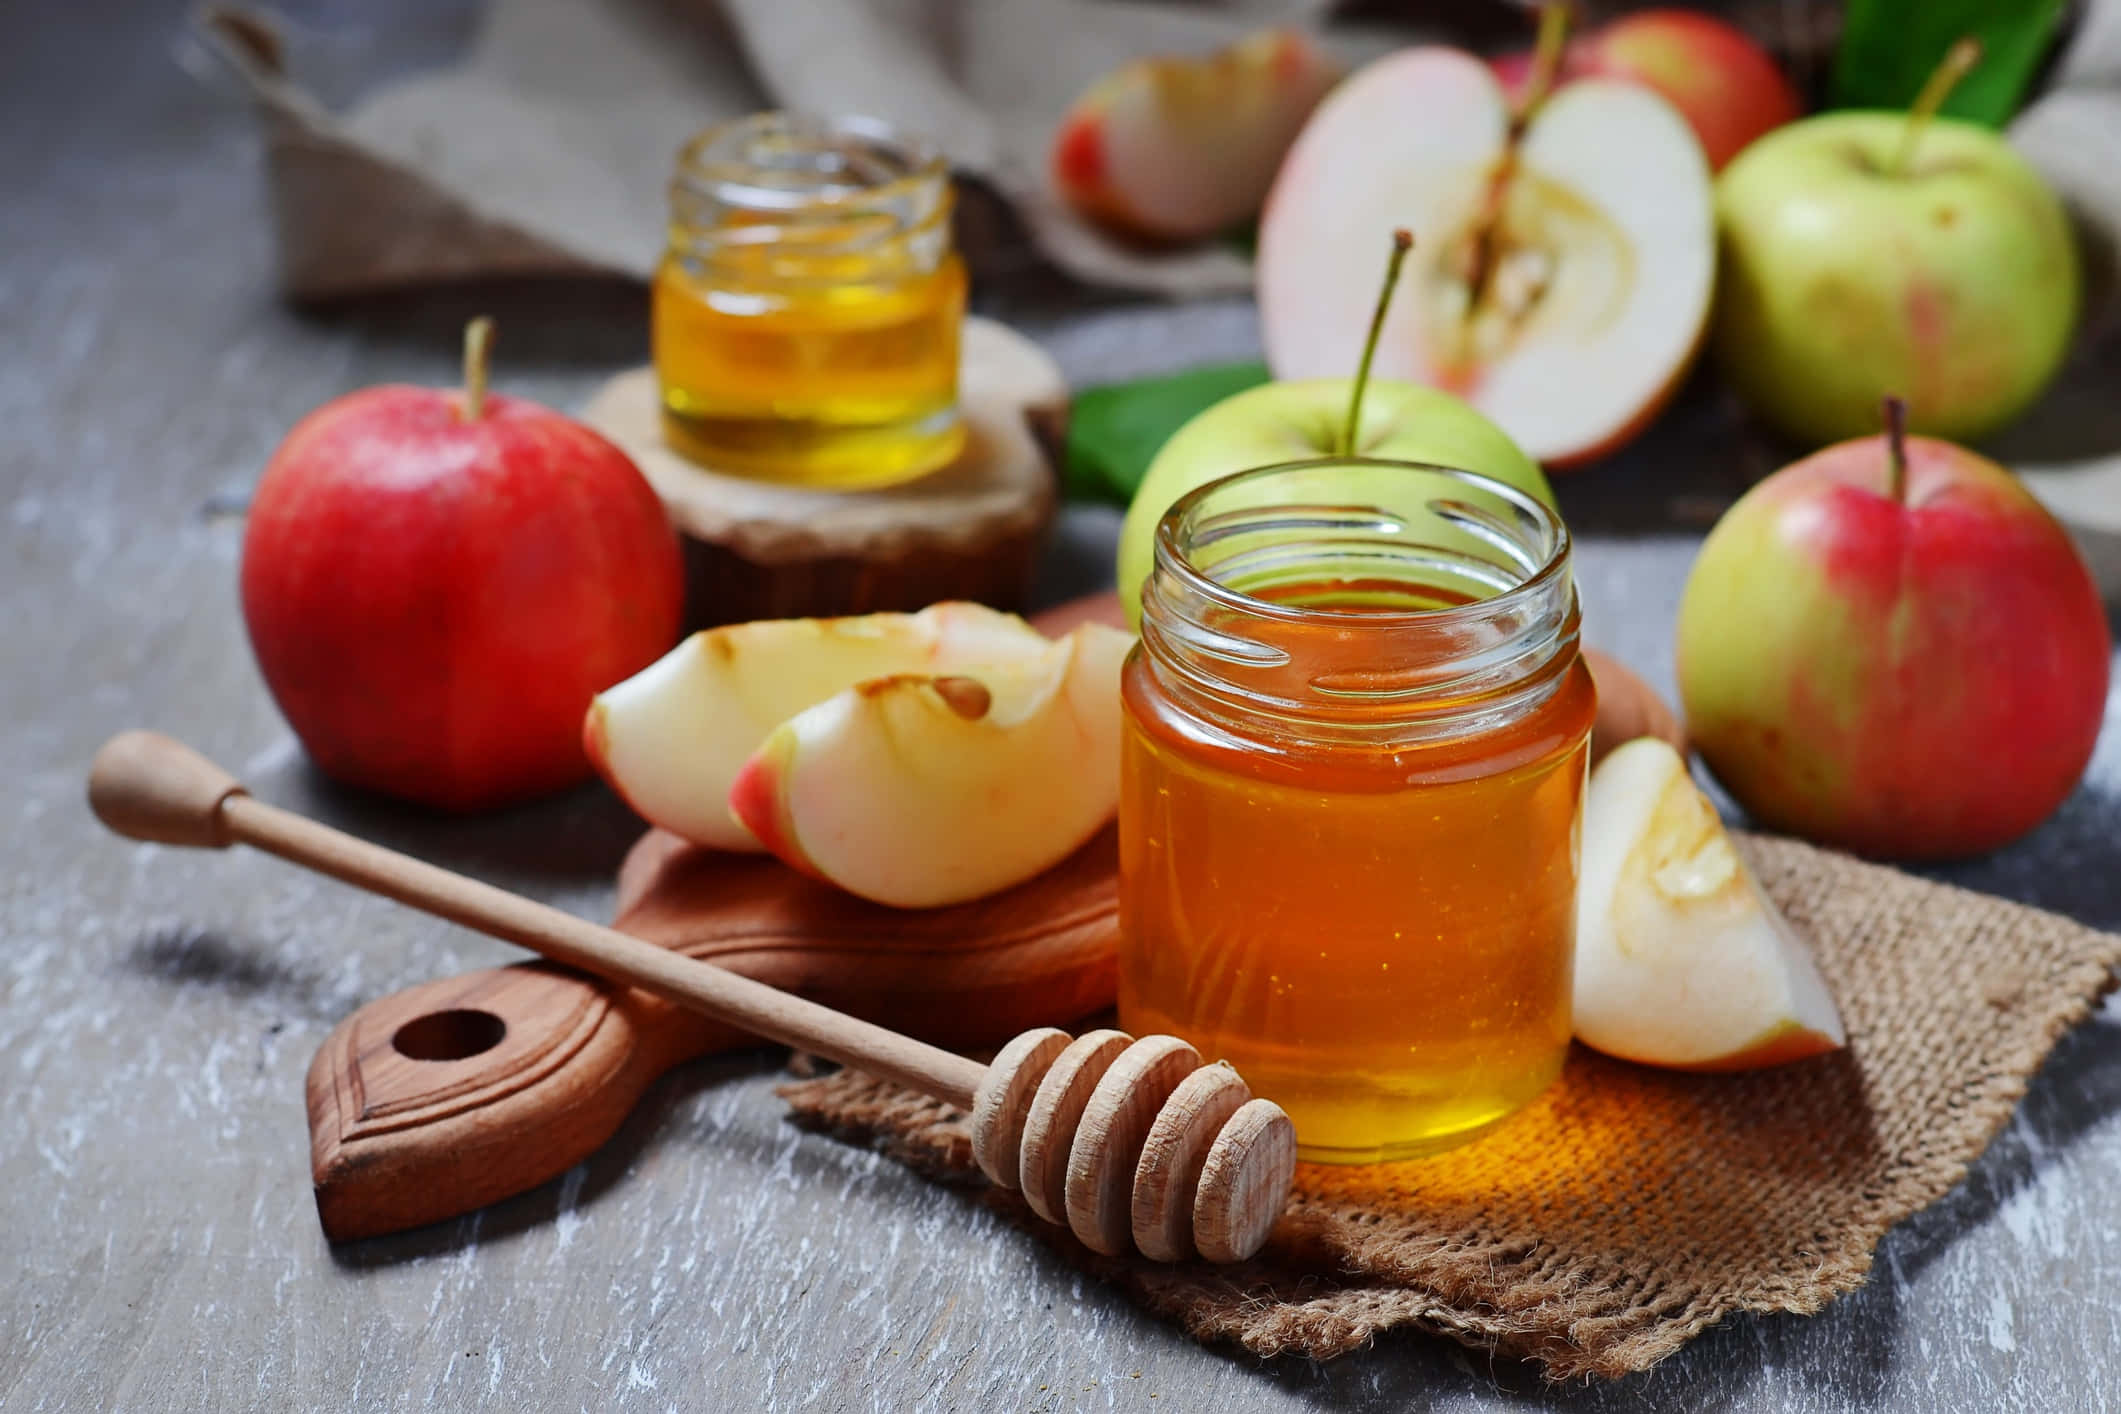 Traditional Apples And Honey For Rosh Hashanah